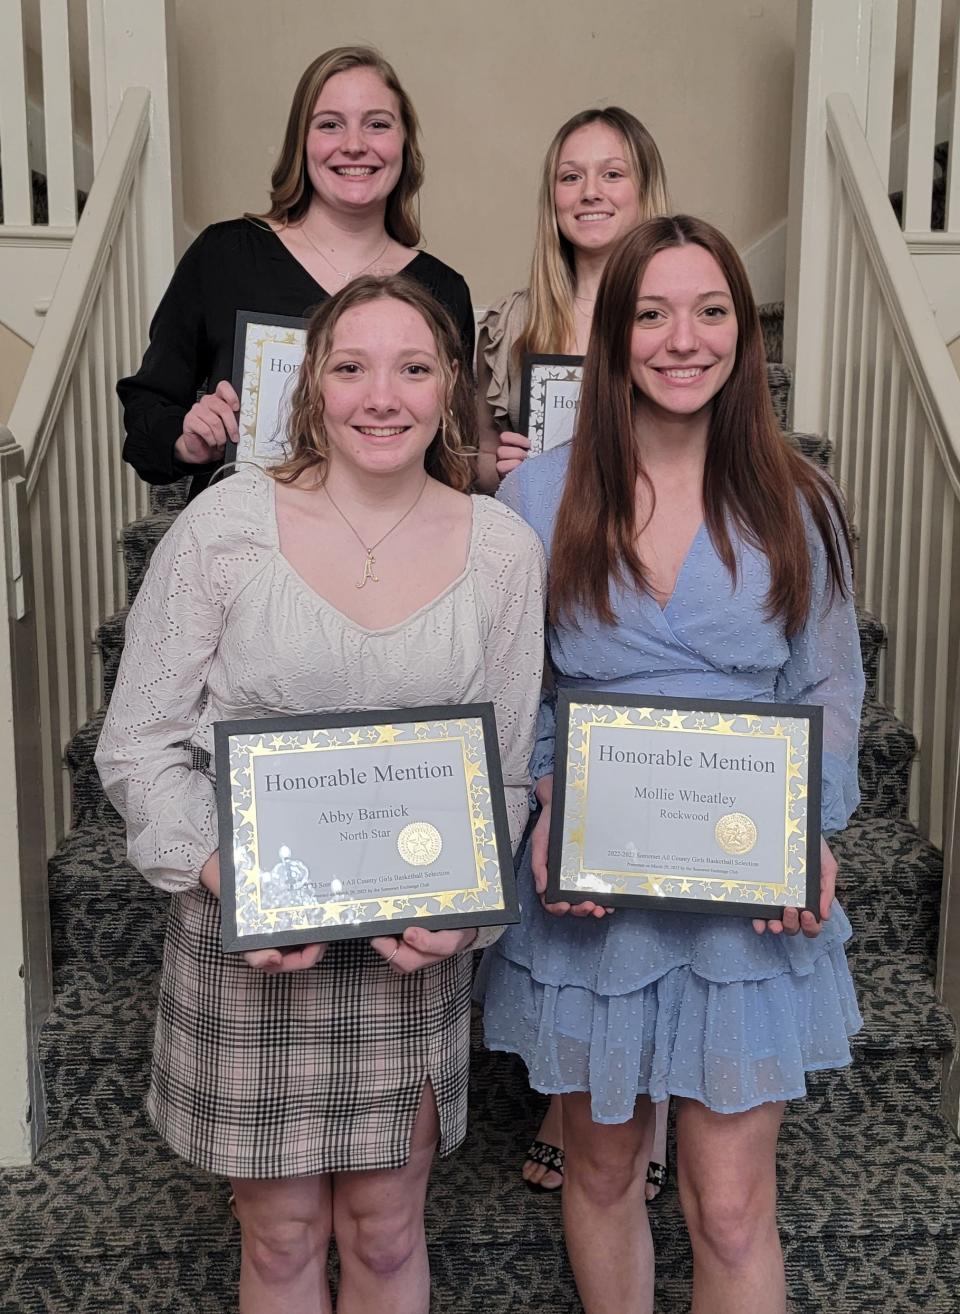 Pictured are Somerset all-county honorable mention selections, front row, from left, North Star's Abby Barnick and Rockwood's Mollie Wheatley, back row, from left, Conemaugh Township's Jenna Brenneman and Windber's Harmony Jablon. Conemaugh Township’s Ava Byer was not present.